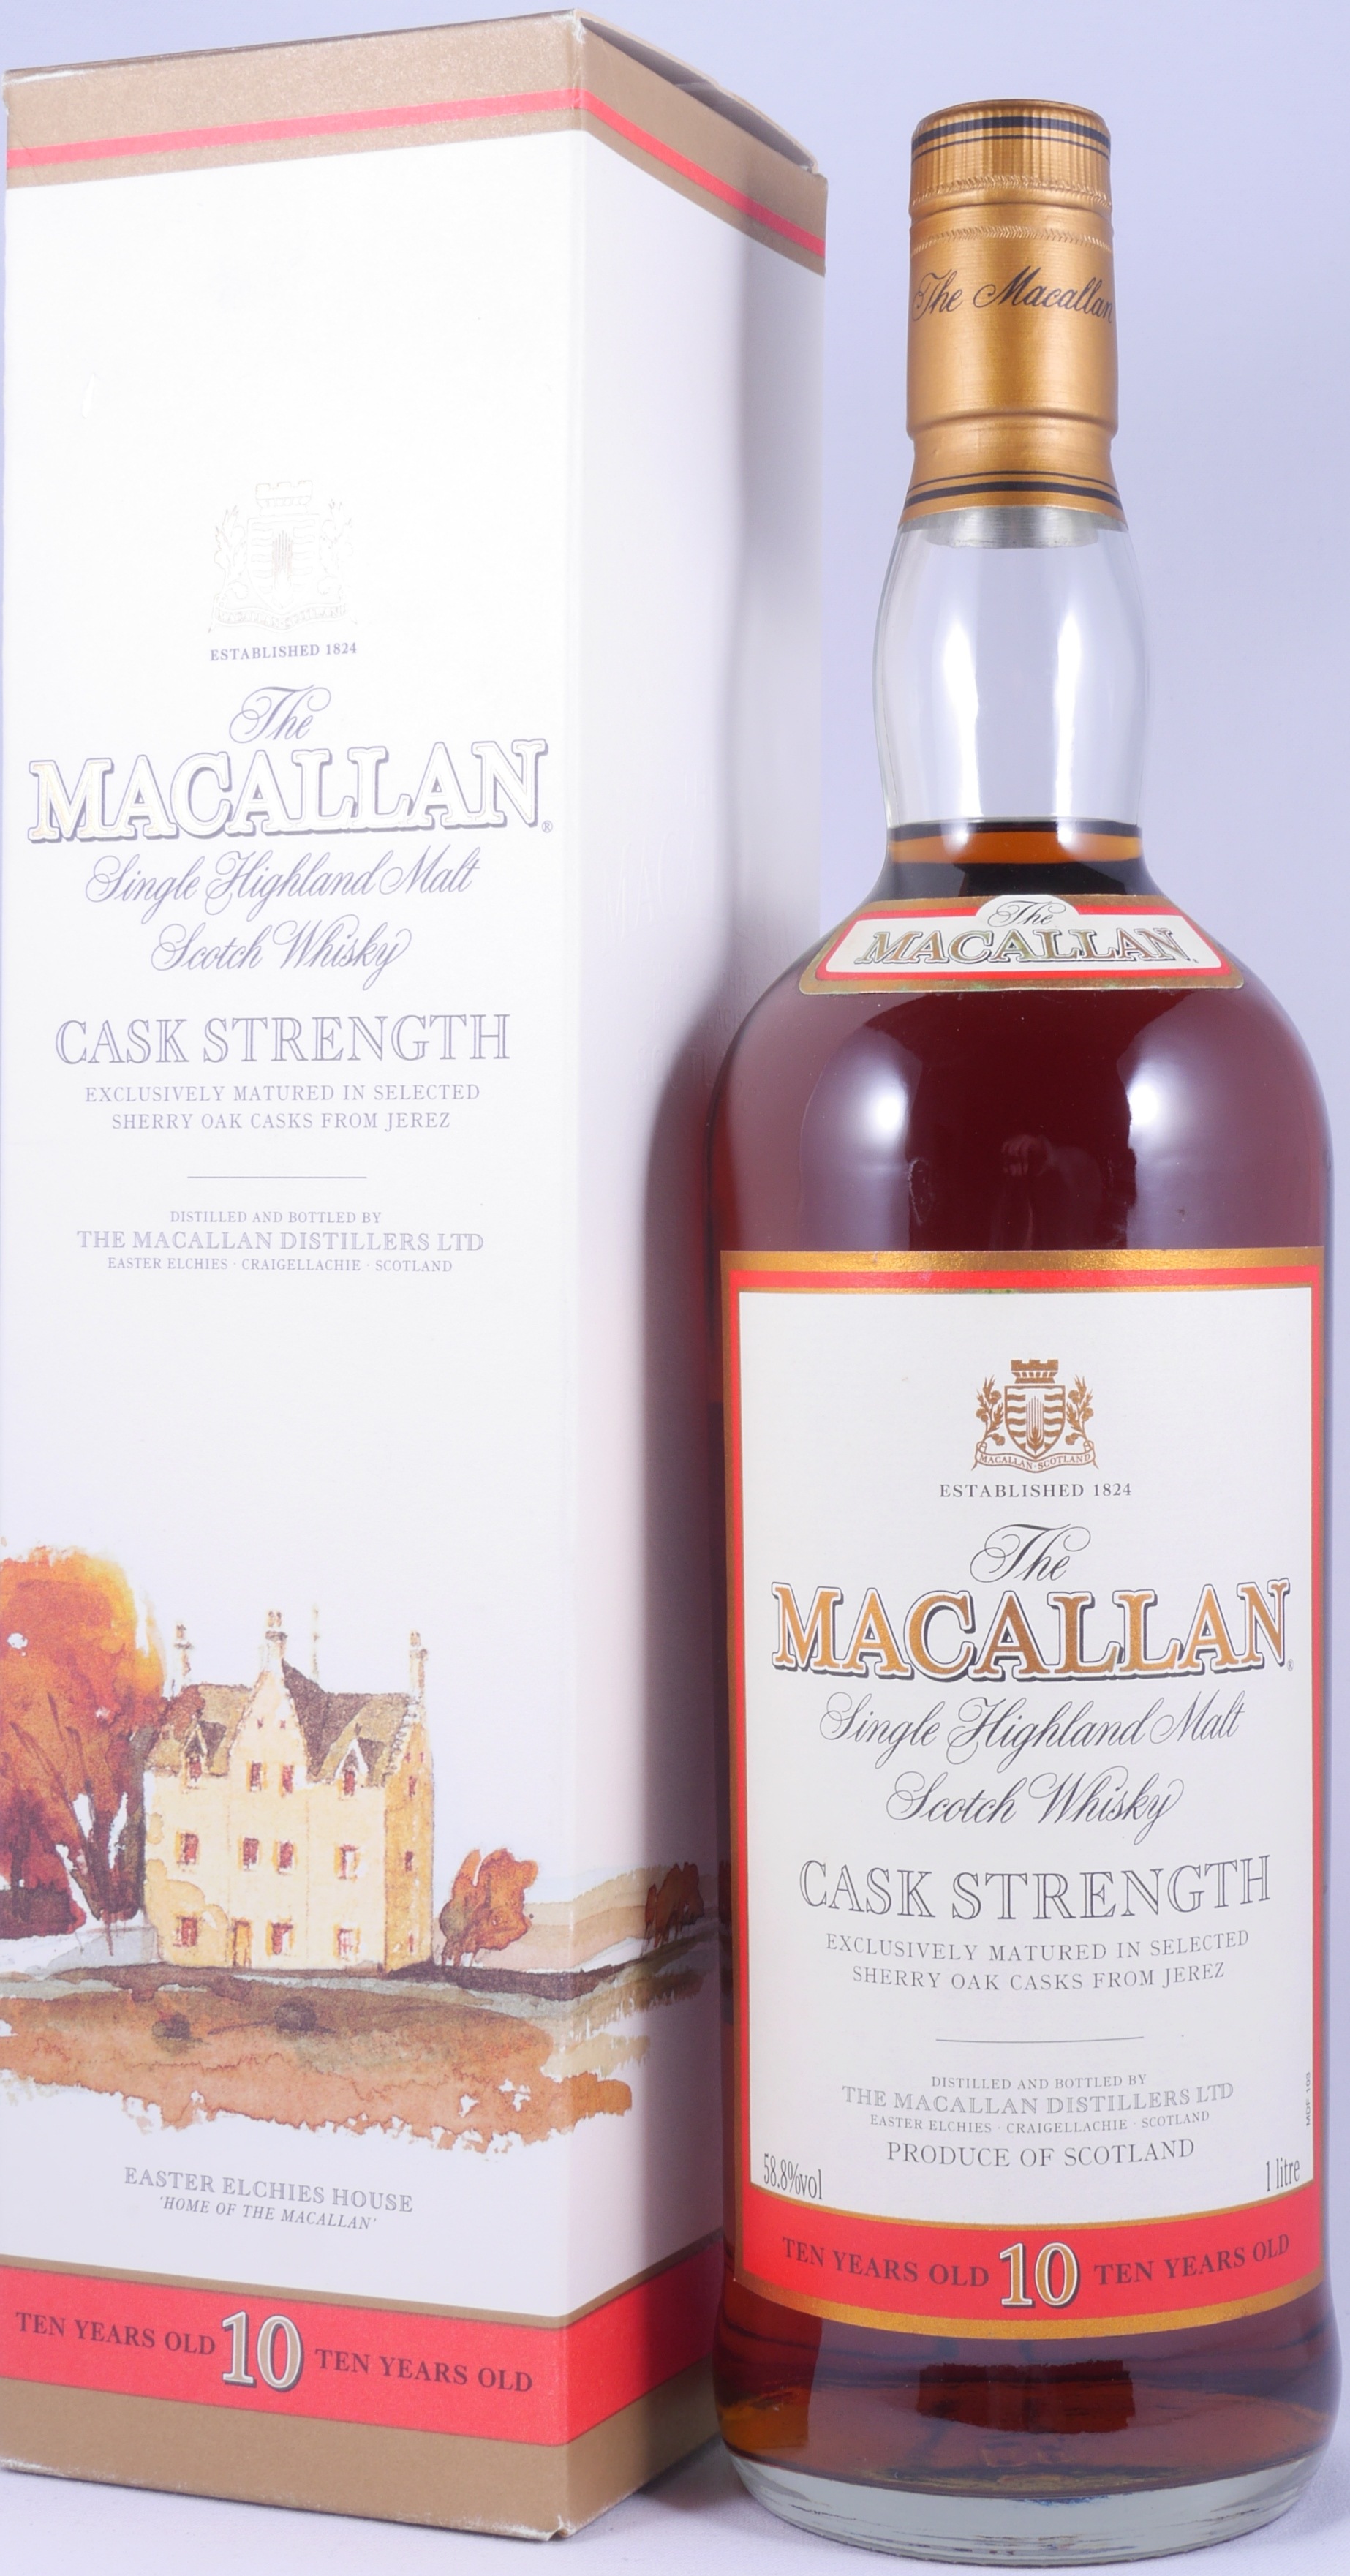 Buy Macallan 10 Years First Edition Cask Strength Sherry Oak Highland Single Malt Scotch Whisky 58 8 Abv At Amcom Secure Online